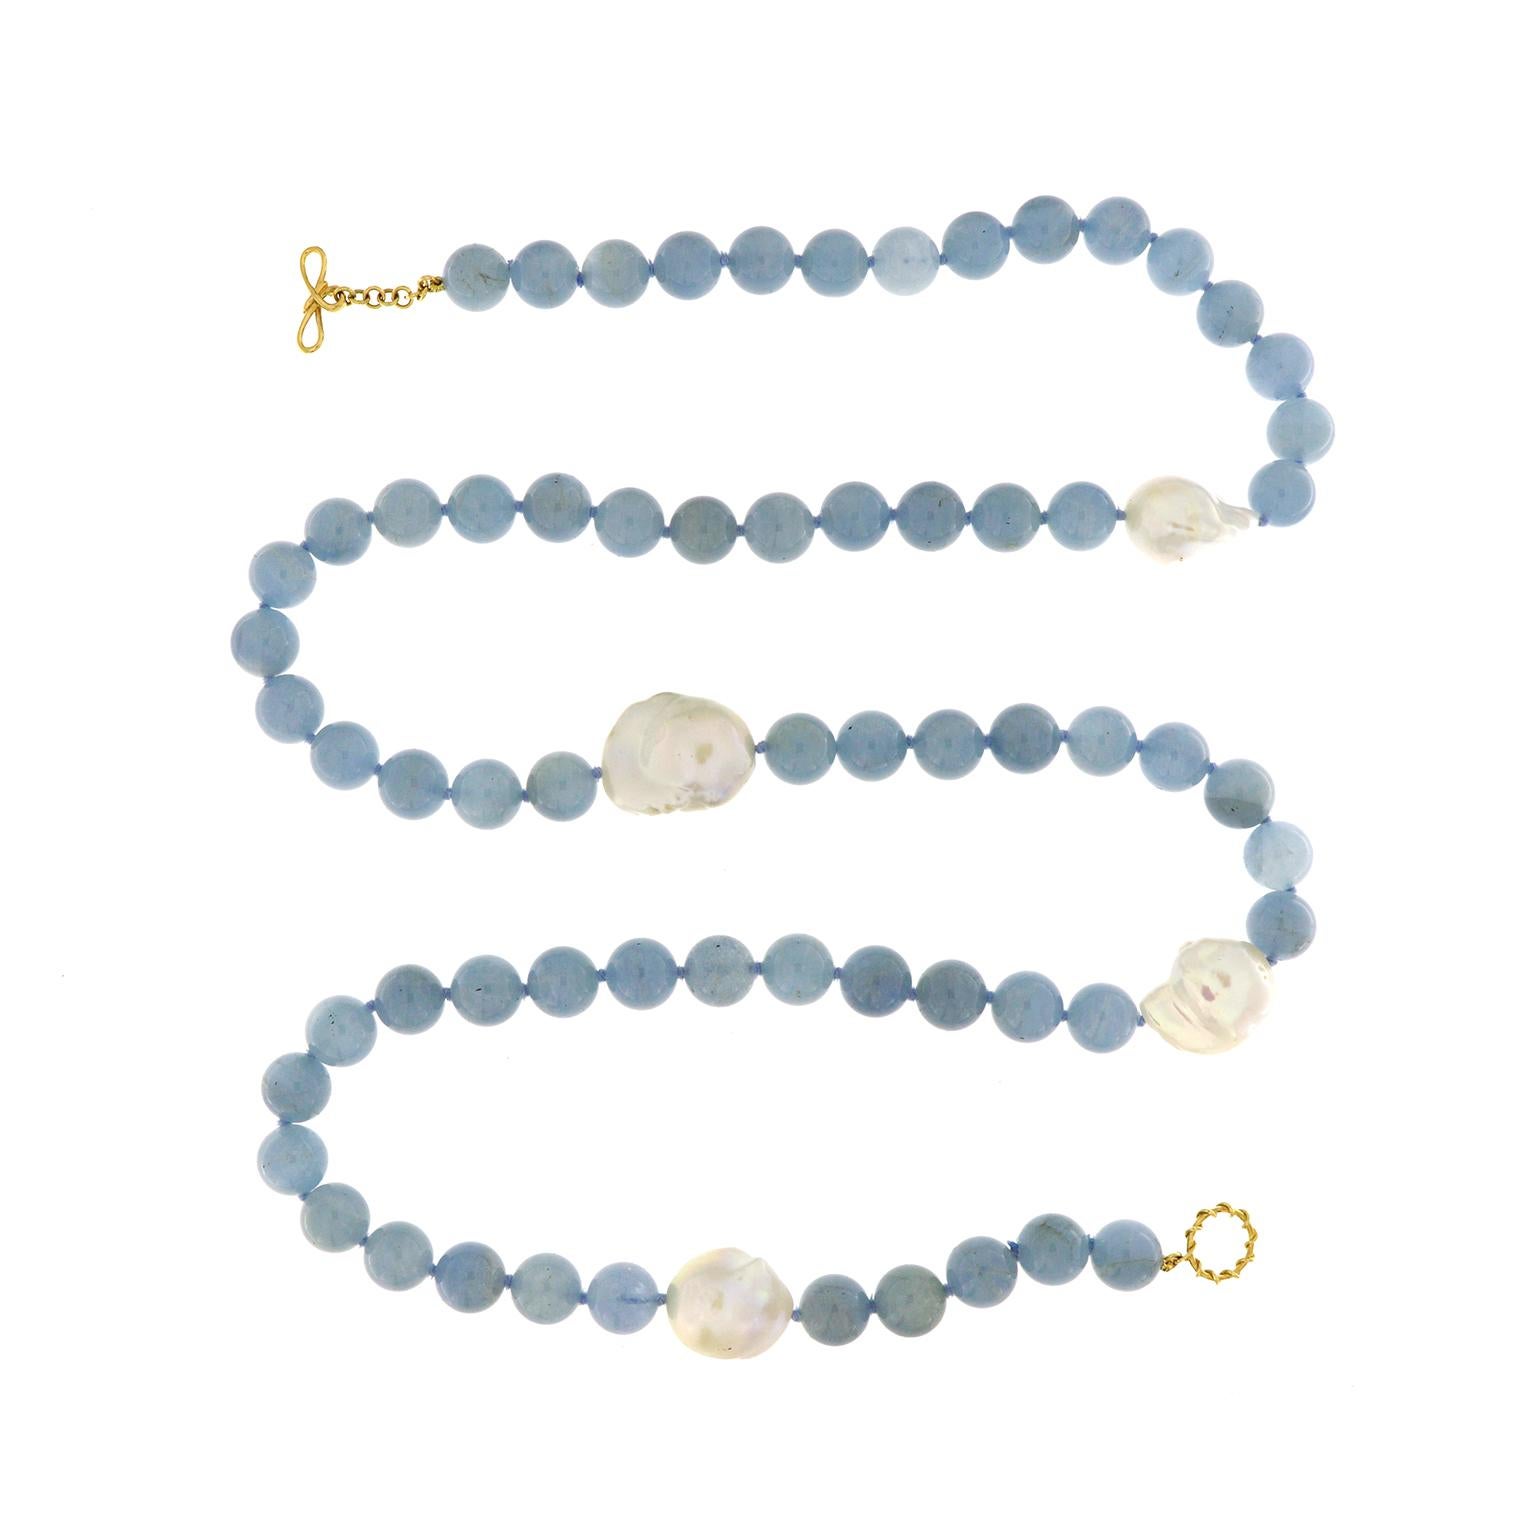 Valentin Magro Aquamarine Bead Necklace with Fresh Water Pearls place treasures into the ocean. Aquamarine and pearls create this striking necklace. Much of the design consists of sixty five 12mm aquamarine beads. Slight variations in color add